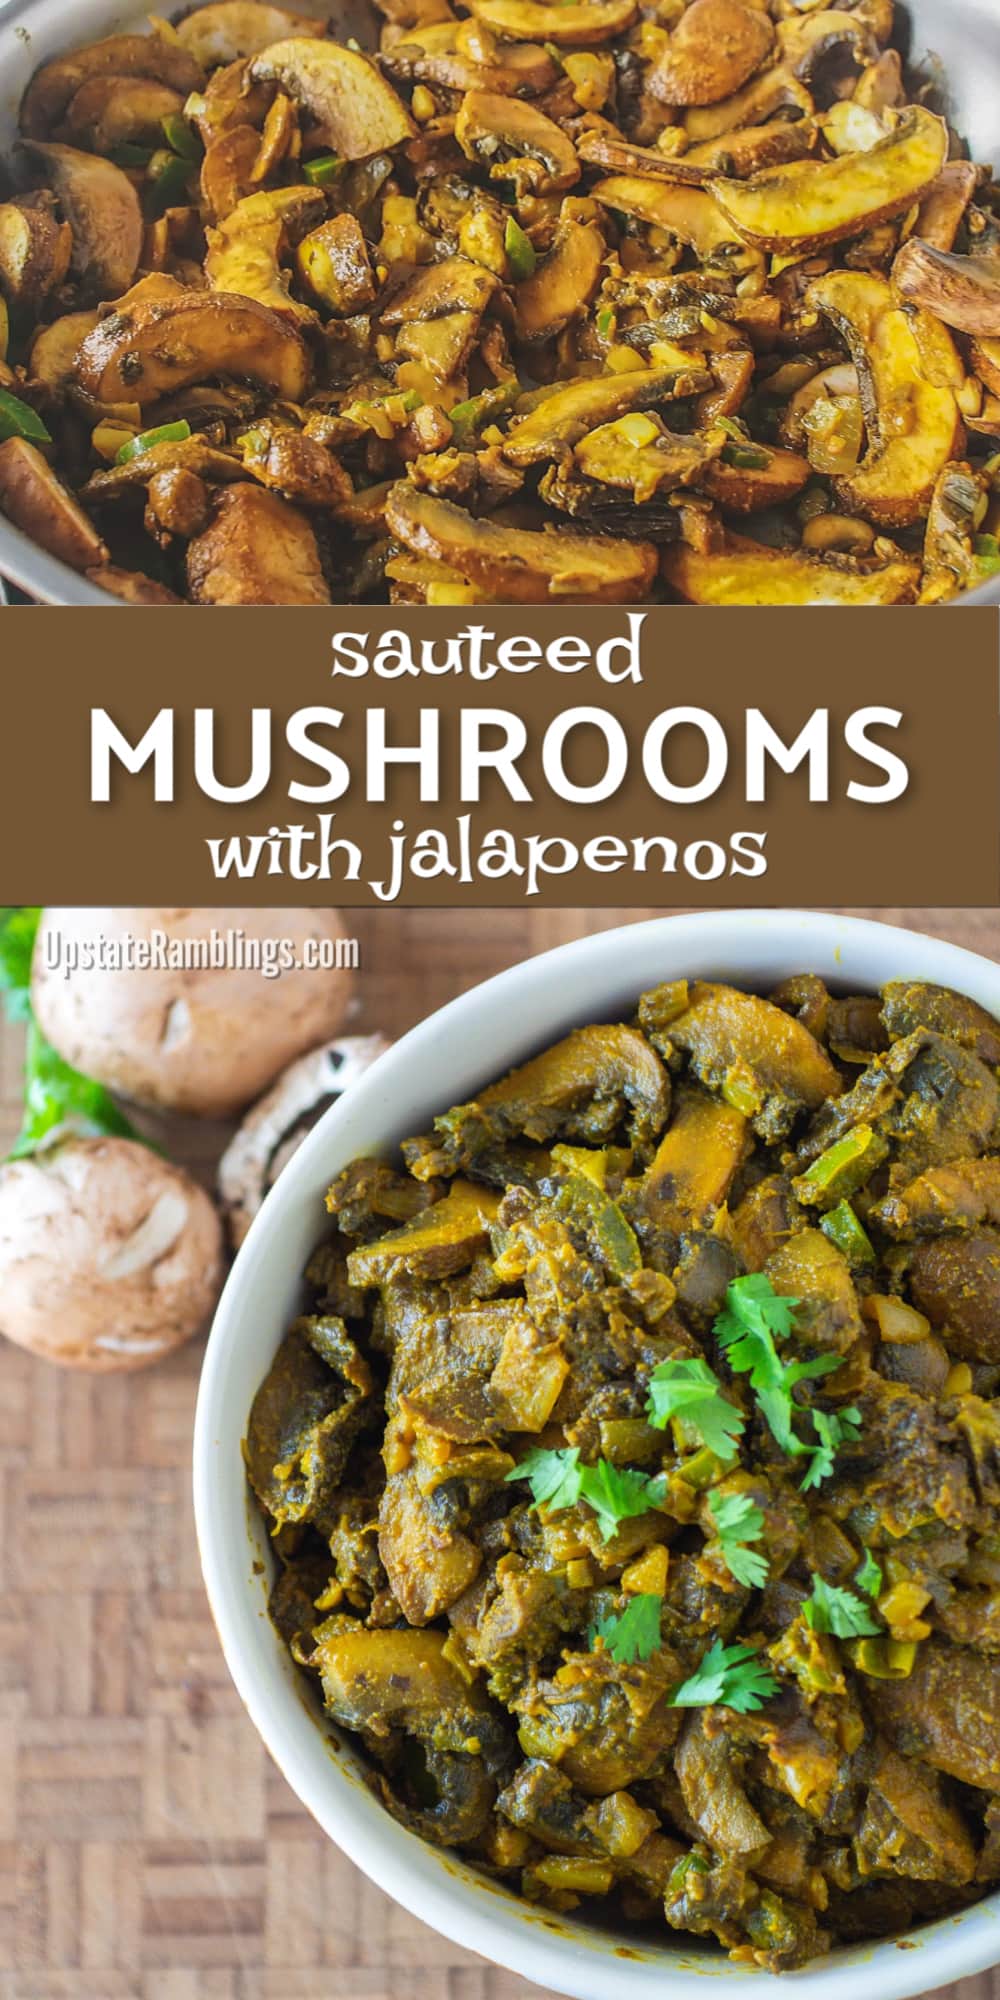 This Sauteed Mushroom recipe is easy to make and is an excellent mushroom side dish for dinner. These easy and flavorful spicy mushrooms are delicious as a side dish, on top of steak or even served cold! #mushrooms #sauteedmushrooms